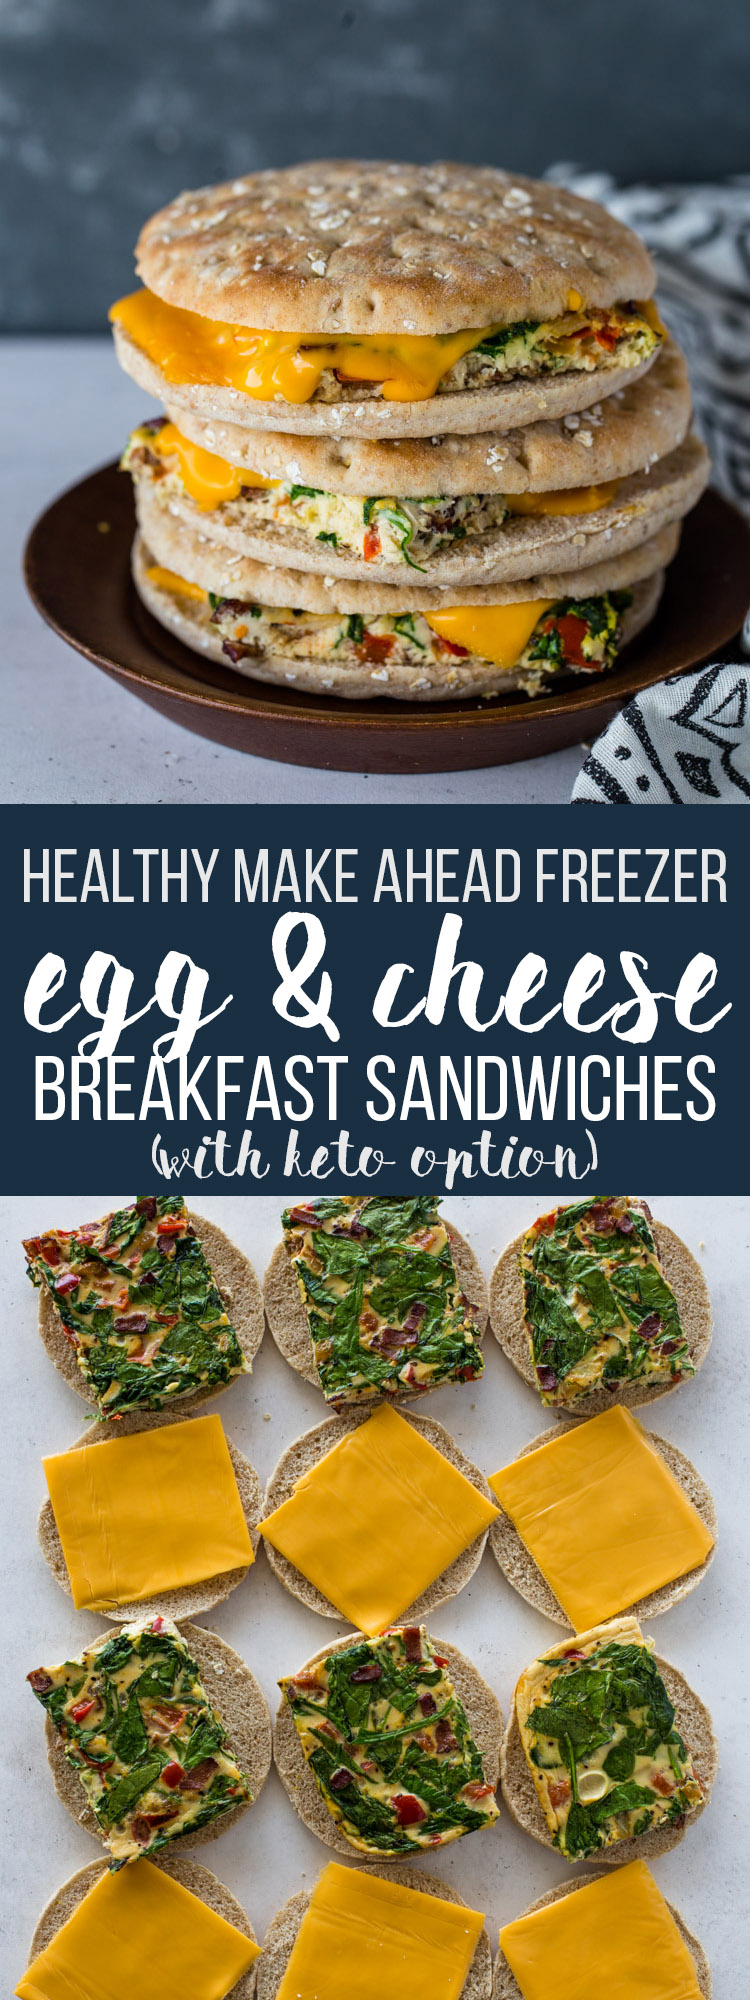 Healthy Make Ahead Egg & Cheese Breakfast Sandwiches (with Keto Option) 